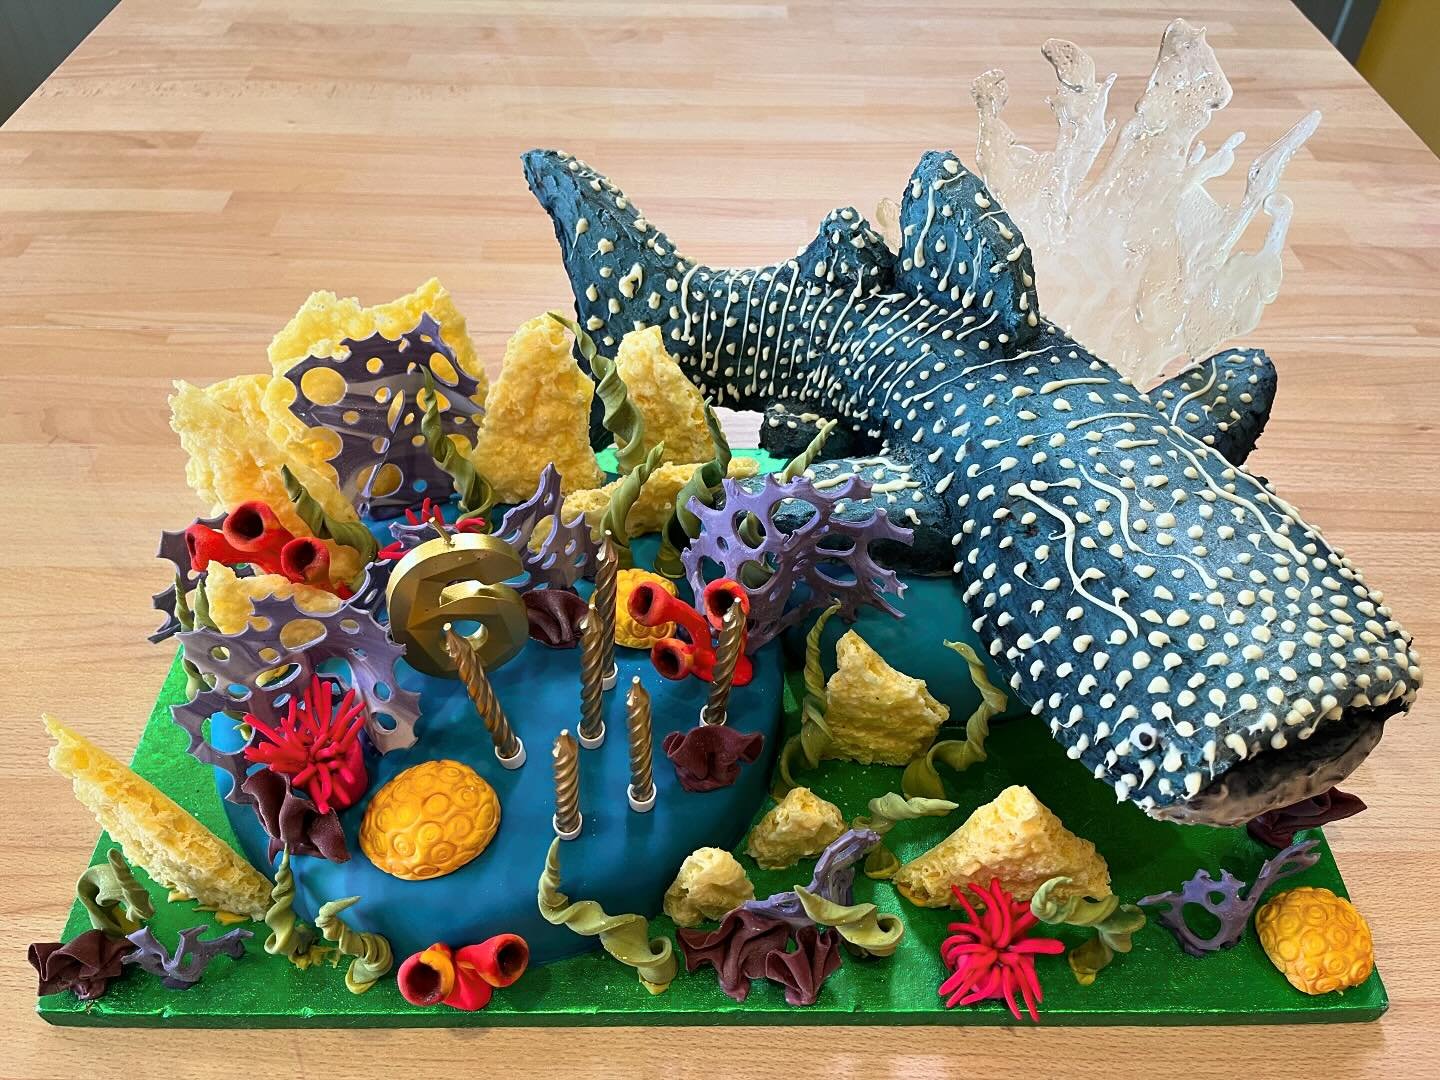 Something a bit different today! It was Toby&rsquo;s birthday a few weeks ago, and he asked for an under the sea cake with a whale shark, so of course I had to give it a go! Everything (apart from the candles!) is 100% edible and was 100% devoured by